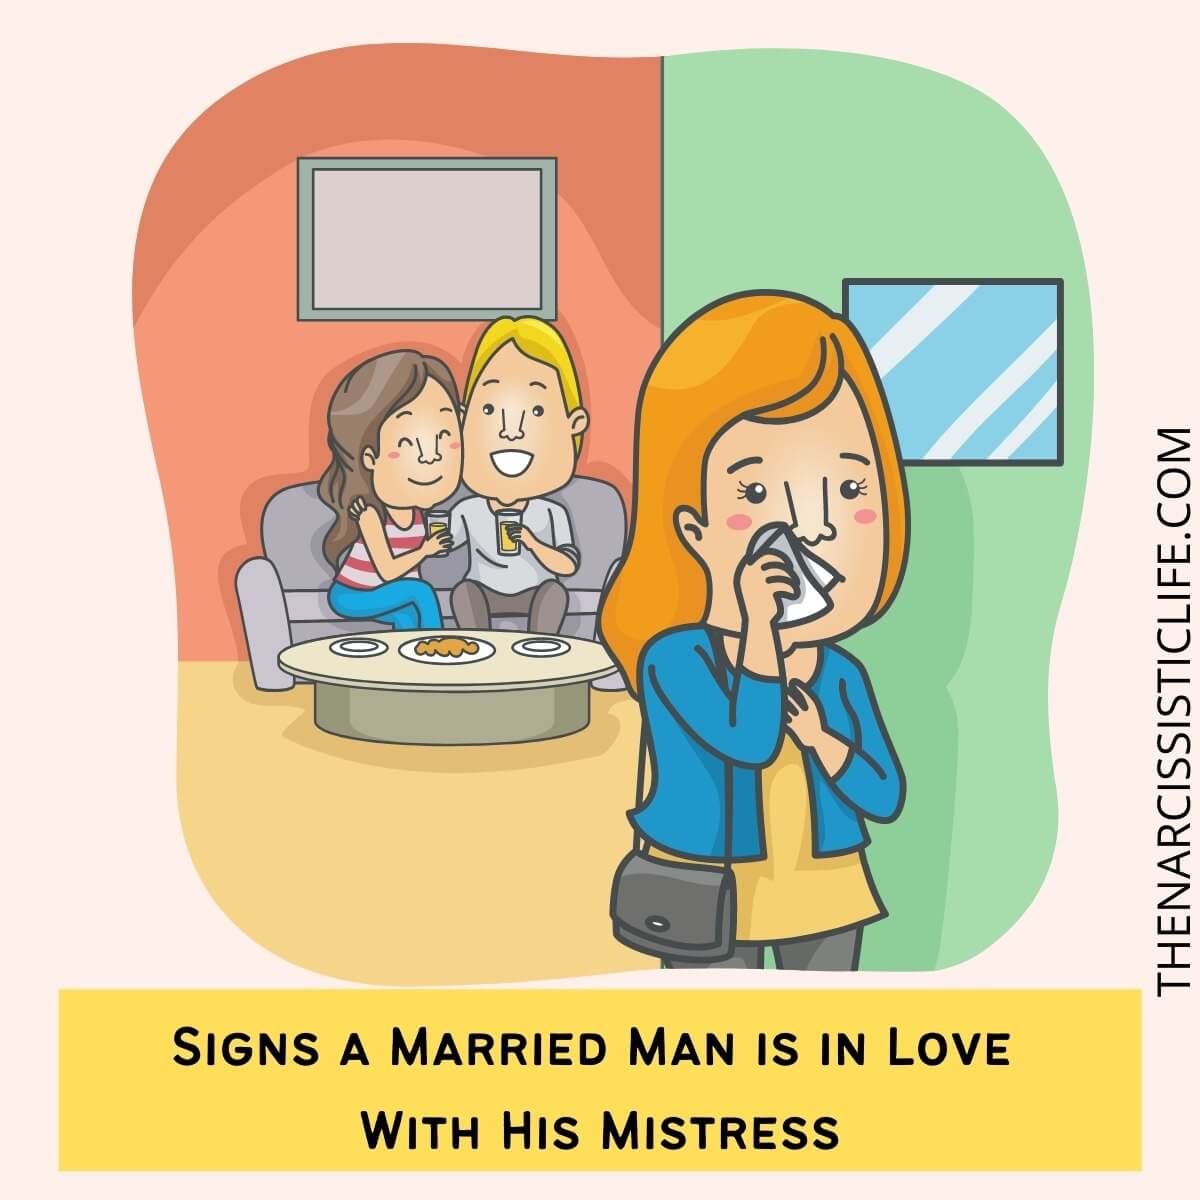 Do Married Men Miss Their Mistresses? image